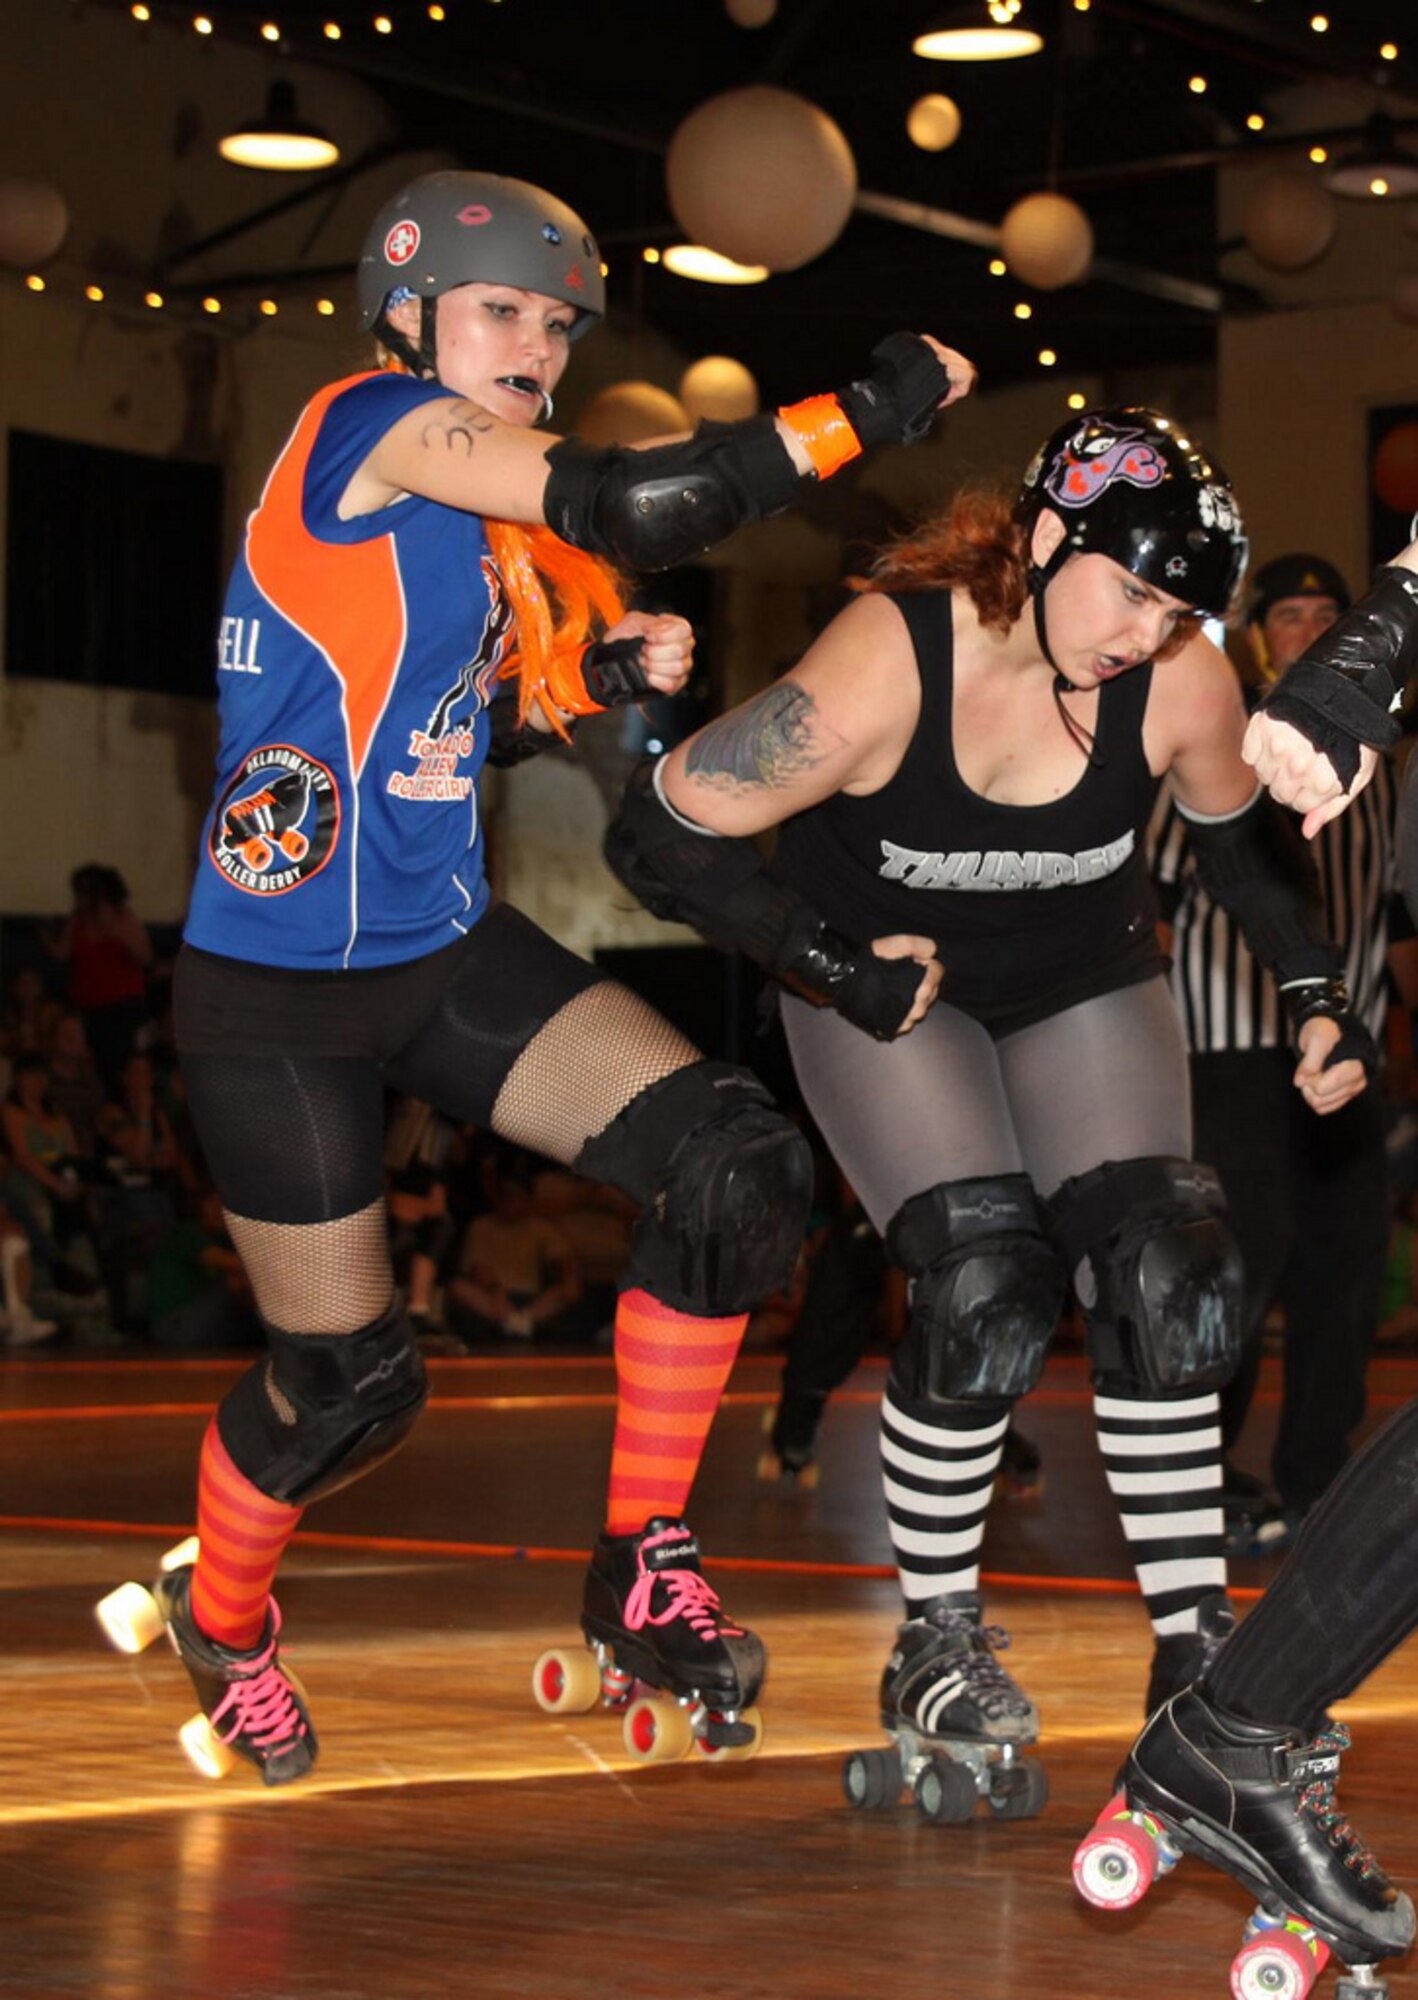 Long-distance runner Jamie Weber, left, was looking to change up her workout routine when she attended her first roller derby bout. Though she’s just playing in her first year, the engineer with the 72nd Air Base Wing Civil Engineering Directorate, has a reputation as one of the best jammers on her team. (Courtesy photo)